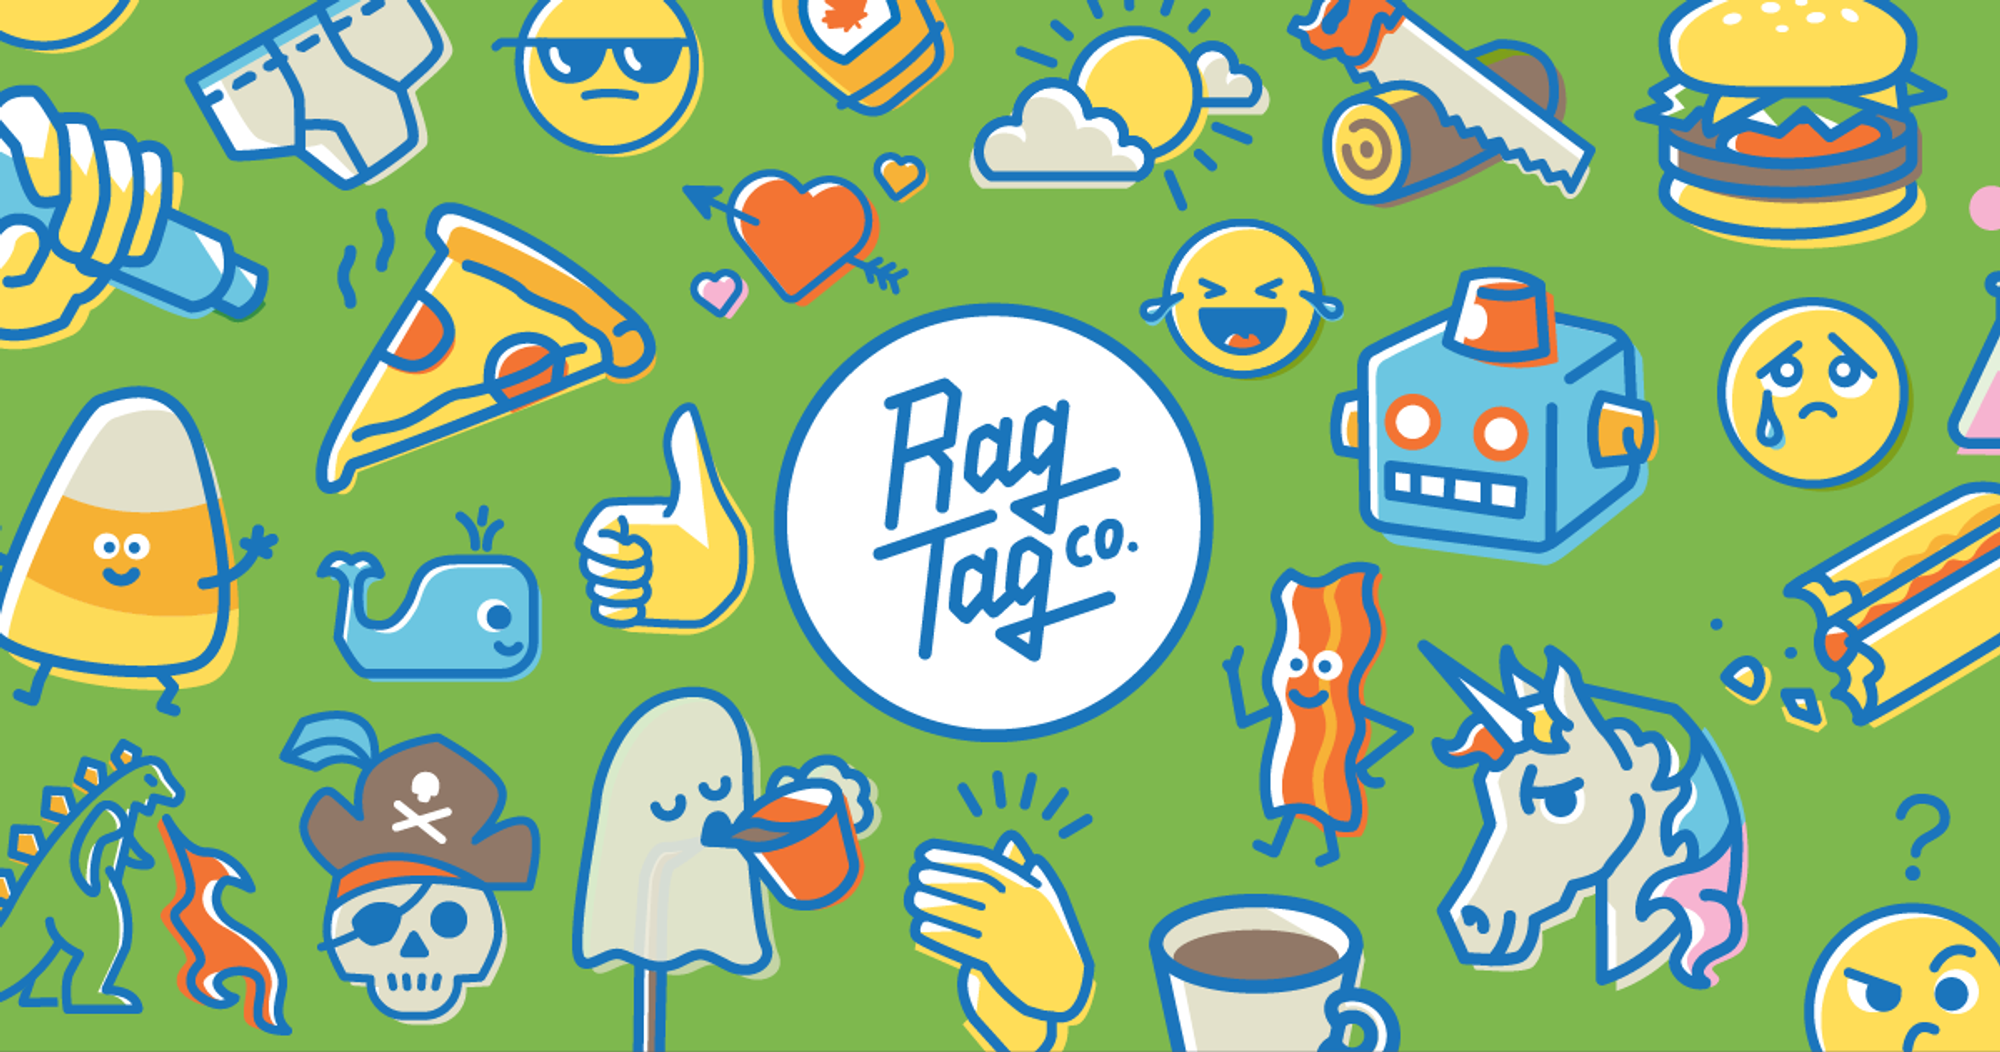 Splash screen of a variety of Rag Tag stickers, from dancing candy corn and retro robots to pizza and mic drops